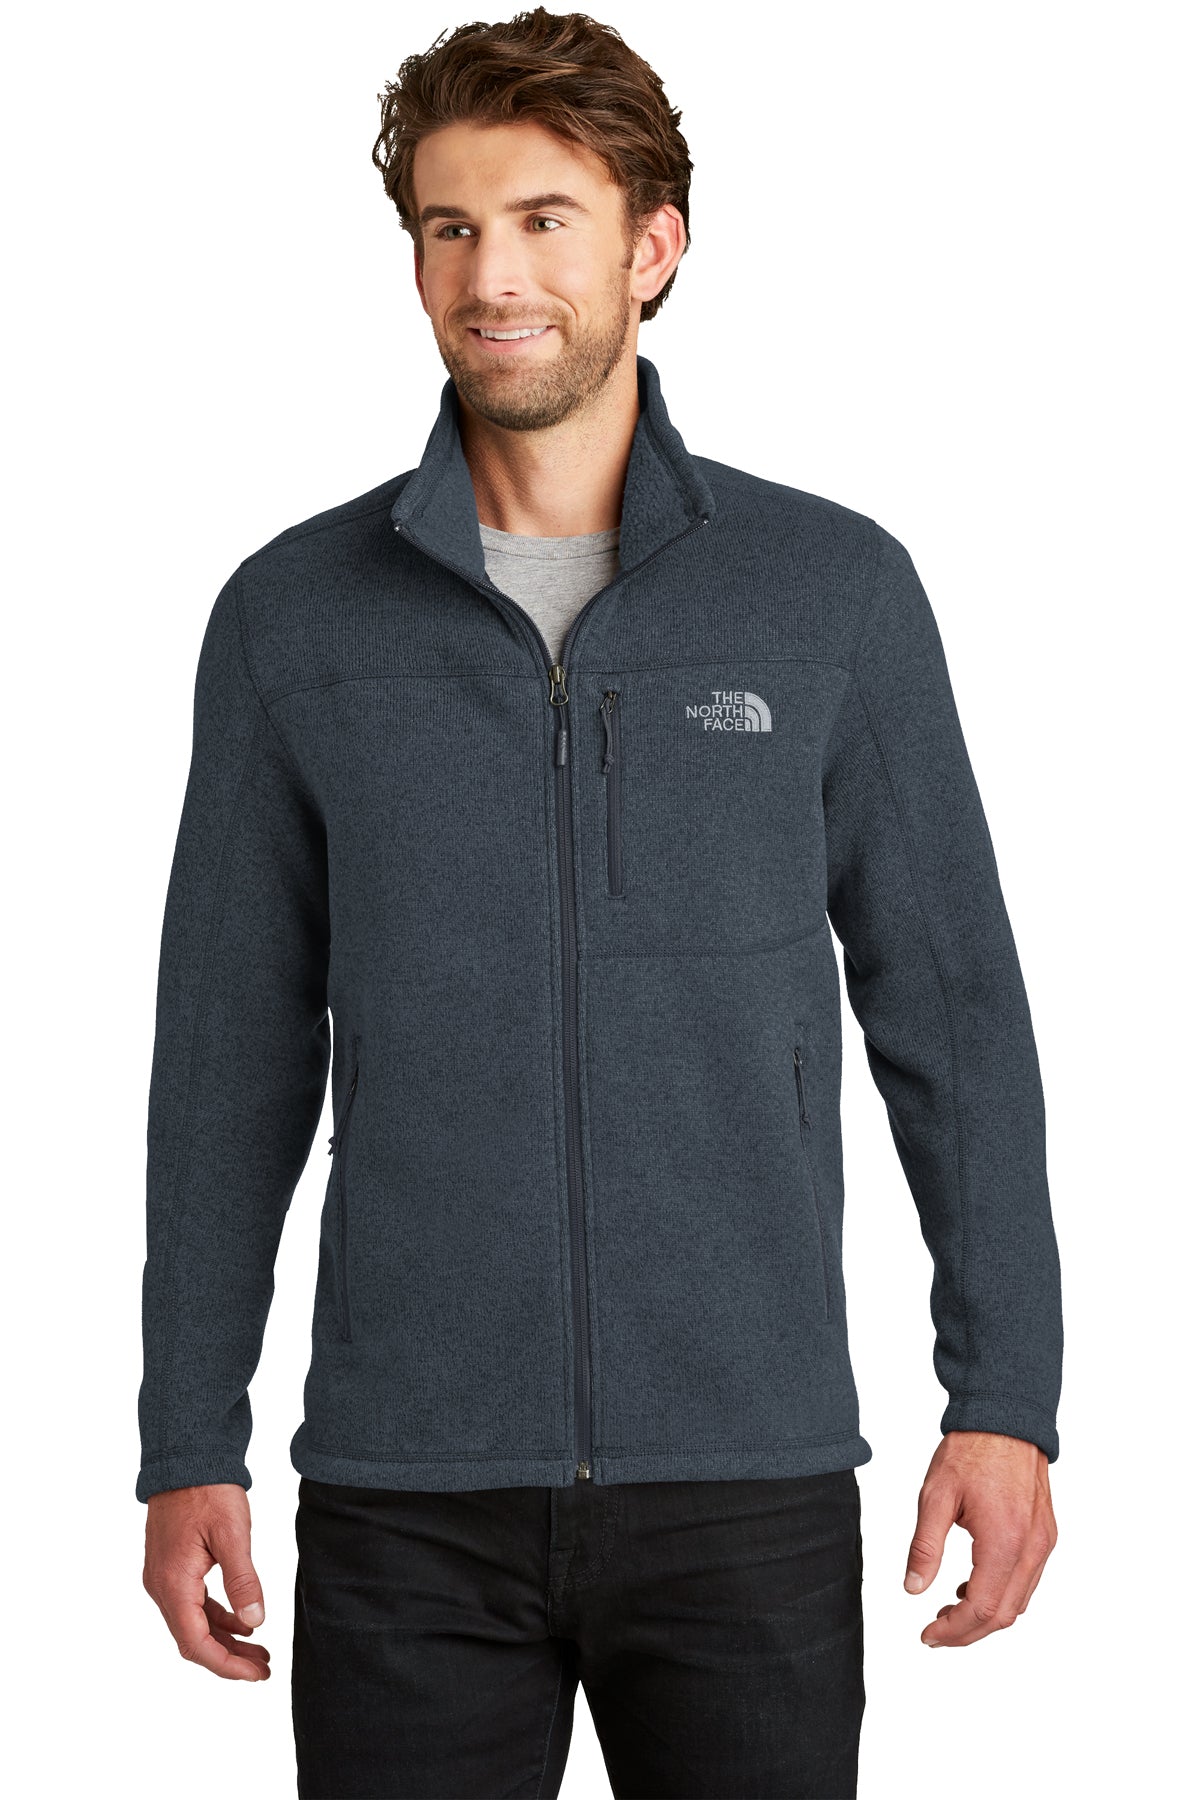 Wilford NF0A3LH7 The North Face® Sweater Fleece Jacket